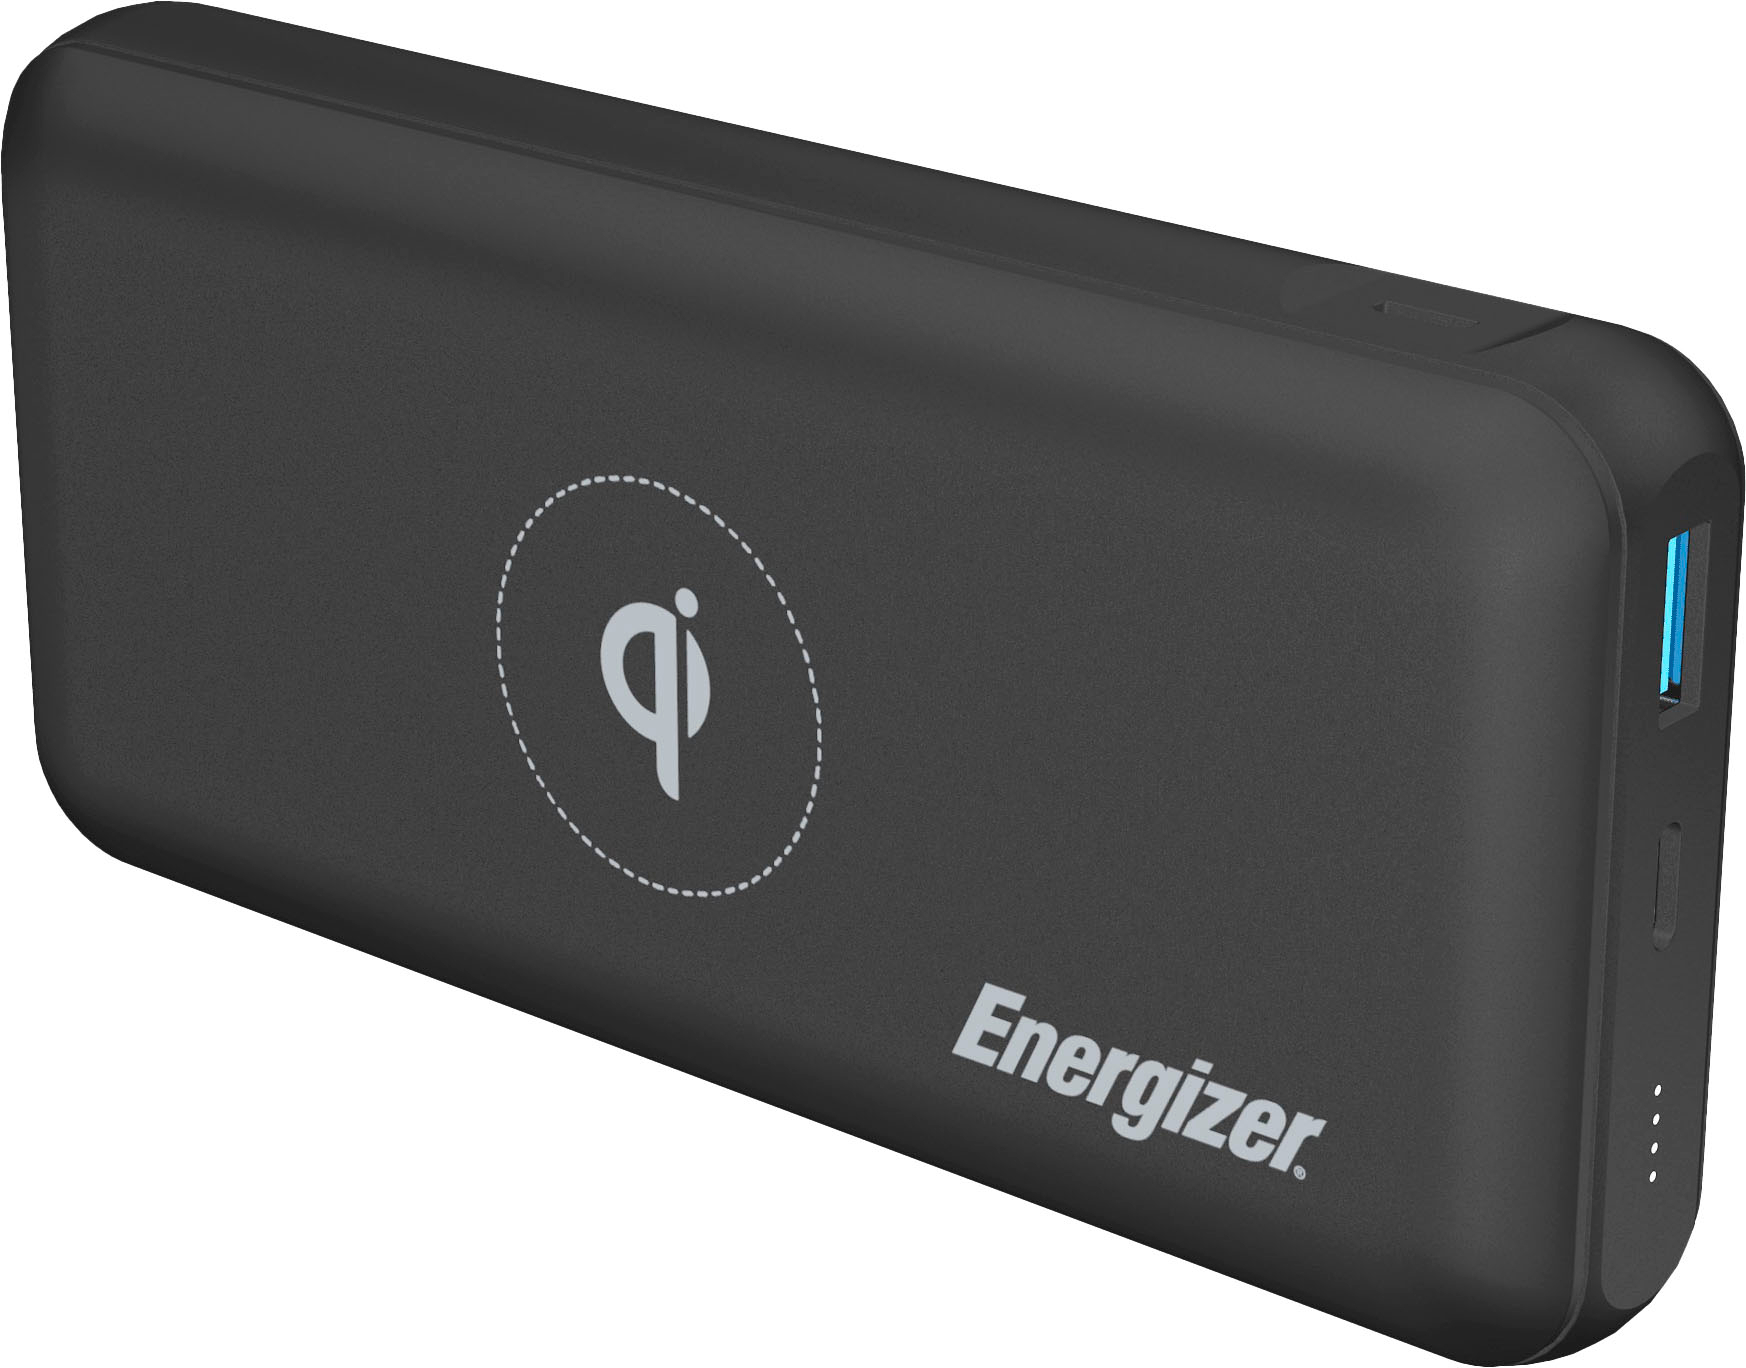 Angle View: mophie - Snap+ Juice Pack Mini 5,000 mAh Portable Charger with MagSafe Compatibility - Black